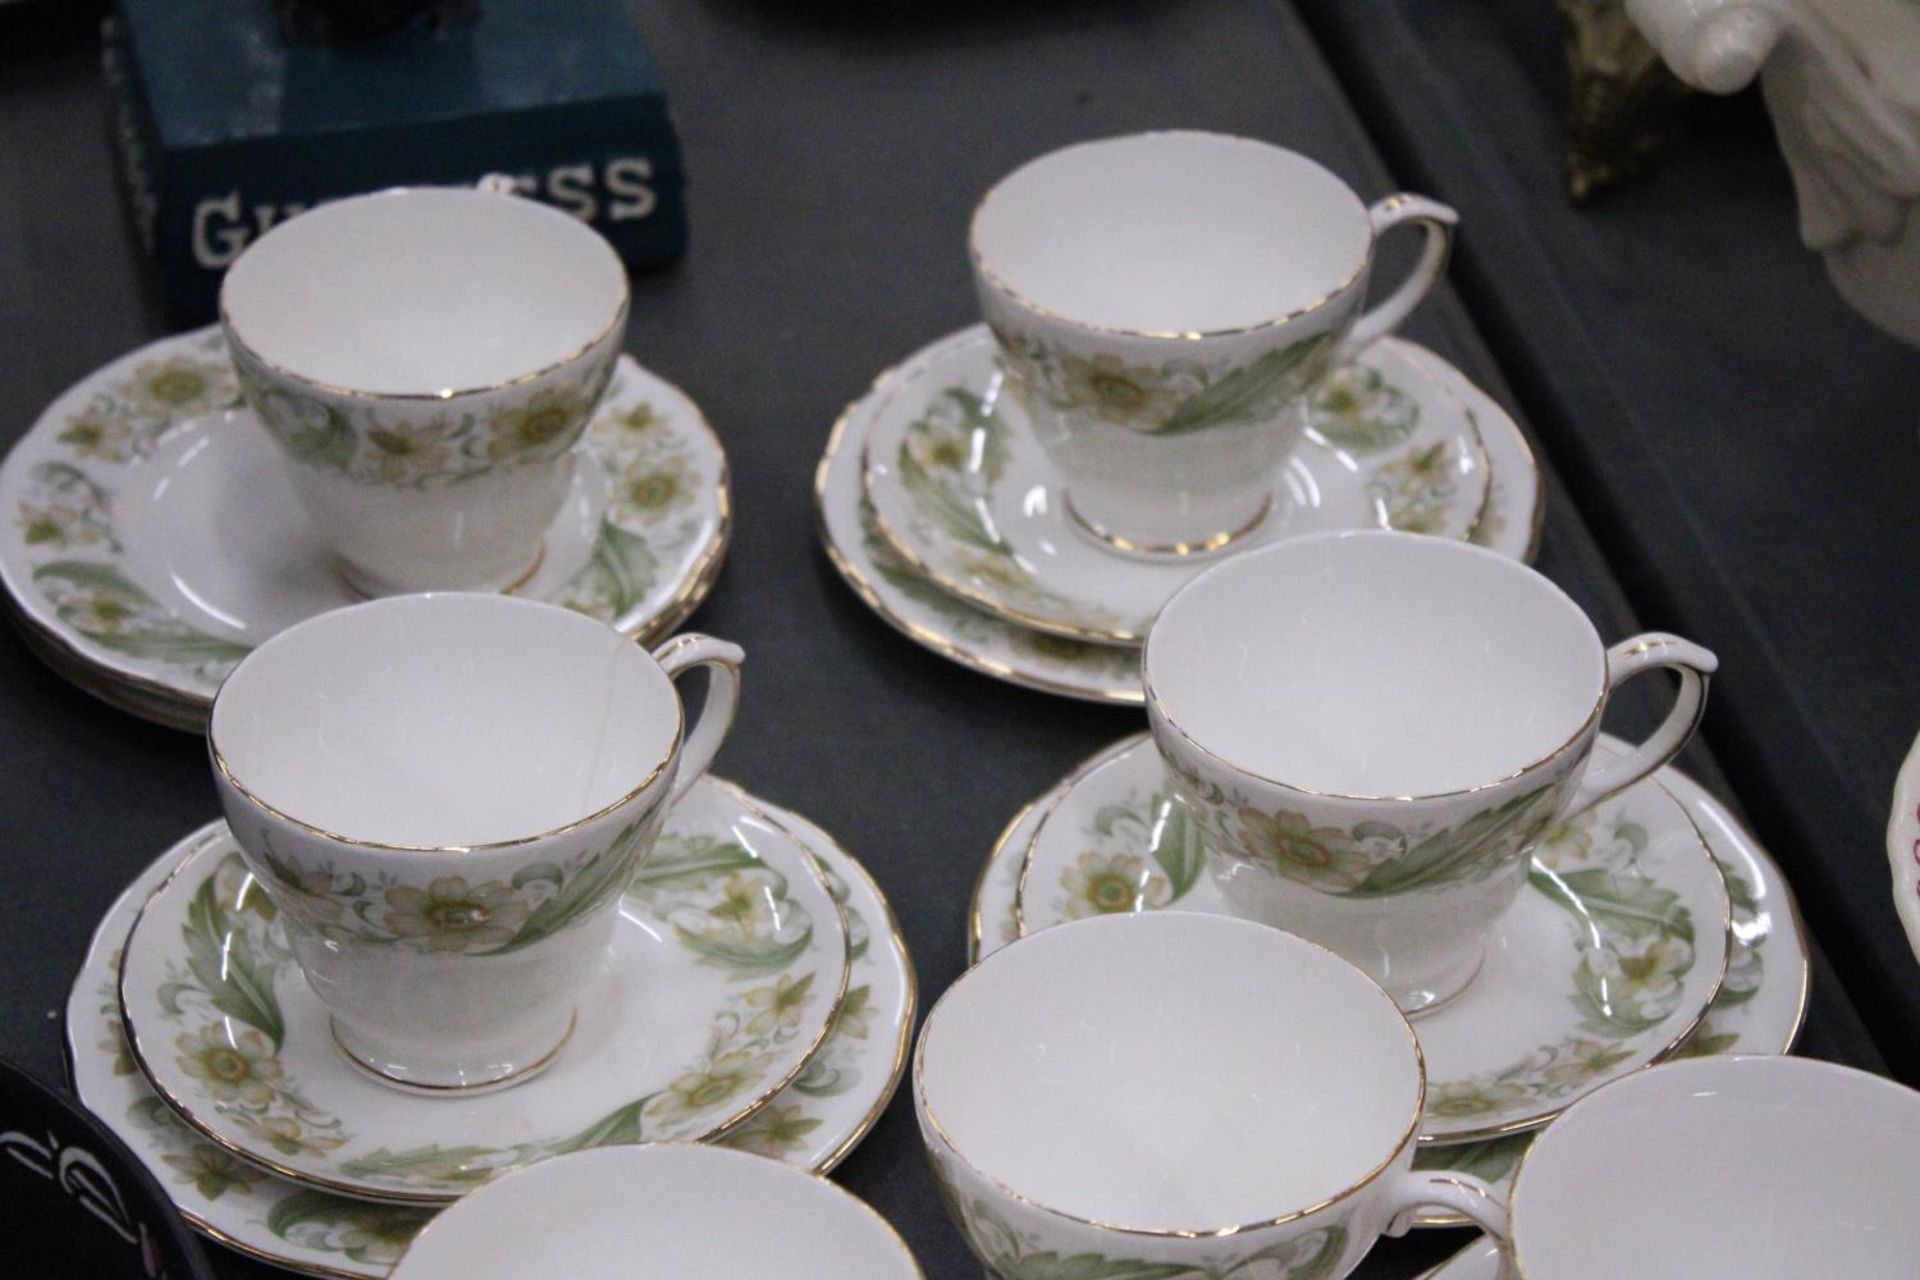 A QUANTITY OF CHINA CUPS, SAUCERS, SIDE PLATES AND CREAM JUGS BY COLCLOUGH AND DUCHESS - Image 4 of 6